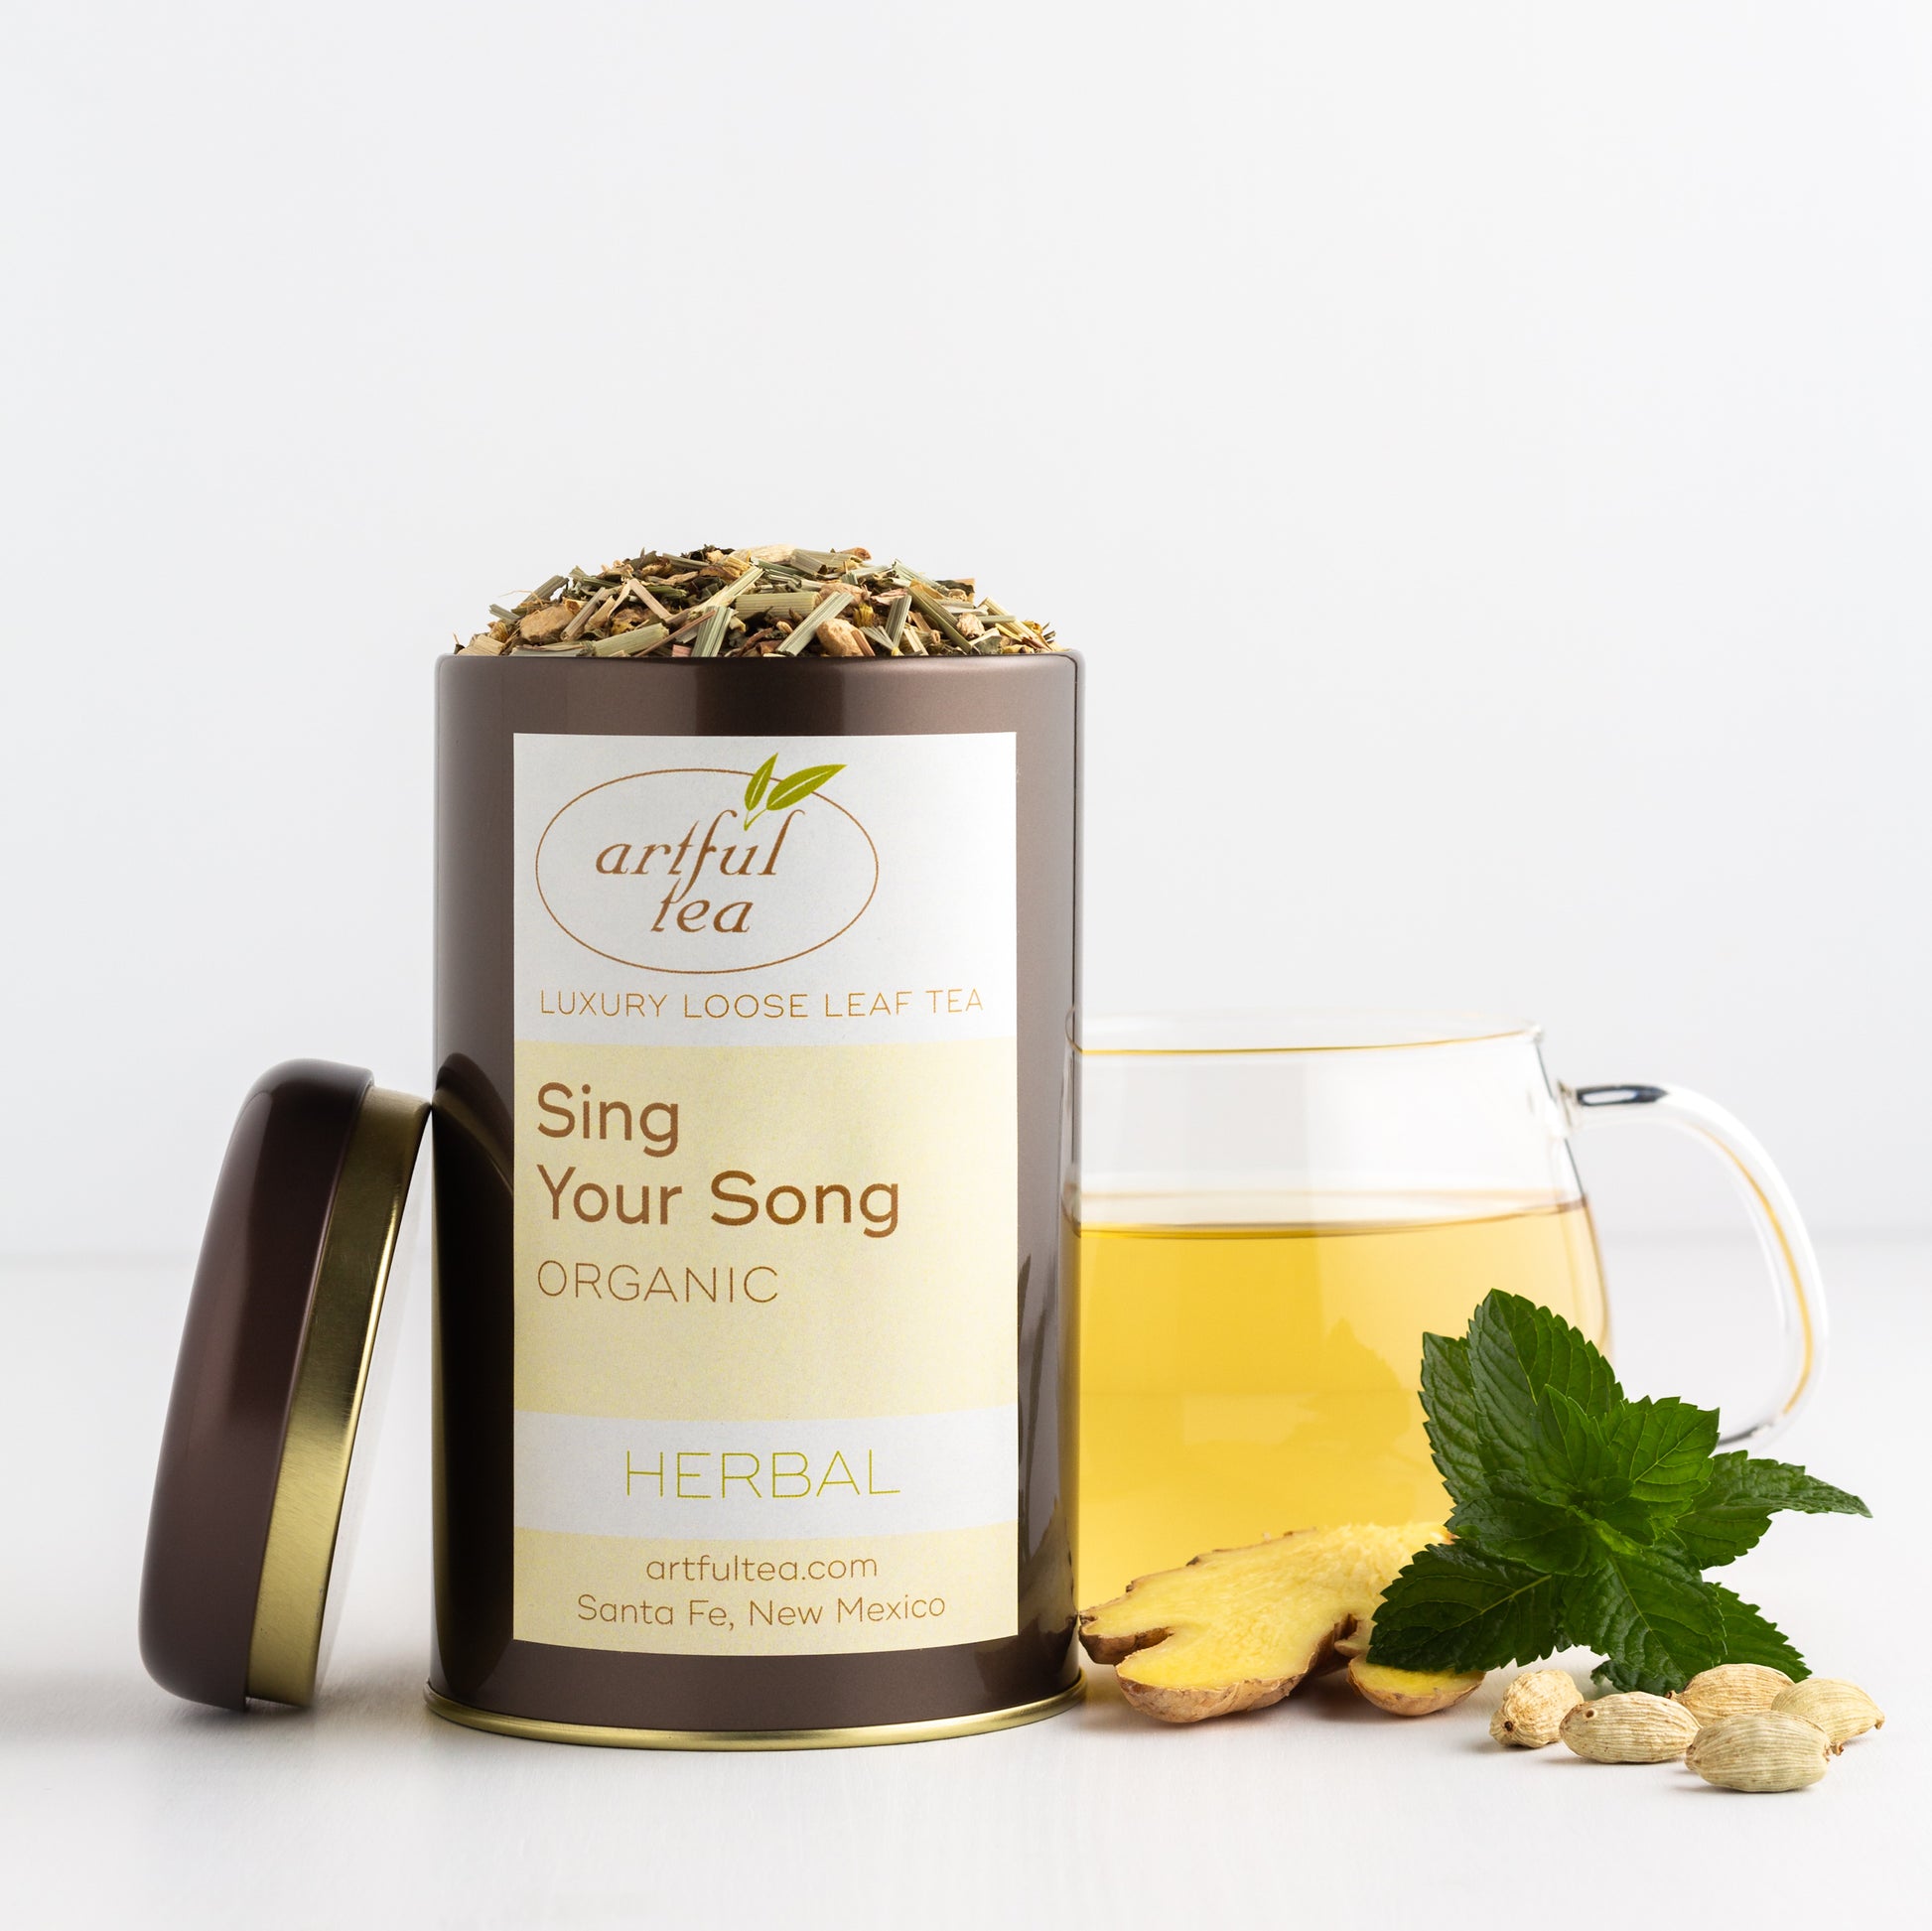 Sing Your Song Organic Herbal Tea shown packaged in a brown tin with the lid off, with a glass mug of brewed tea and some ginger root, mint leaves and cardamom pods nearby